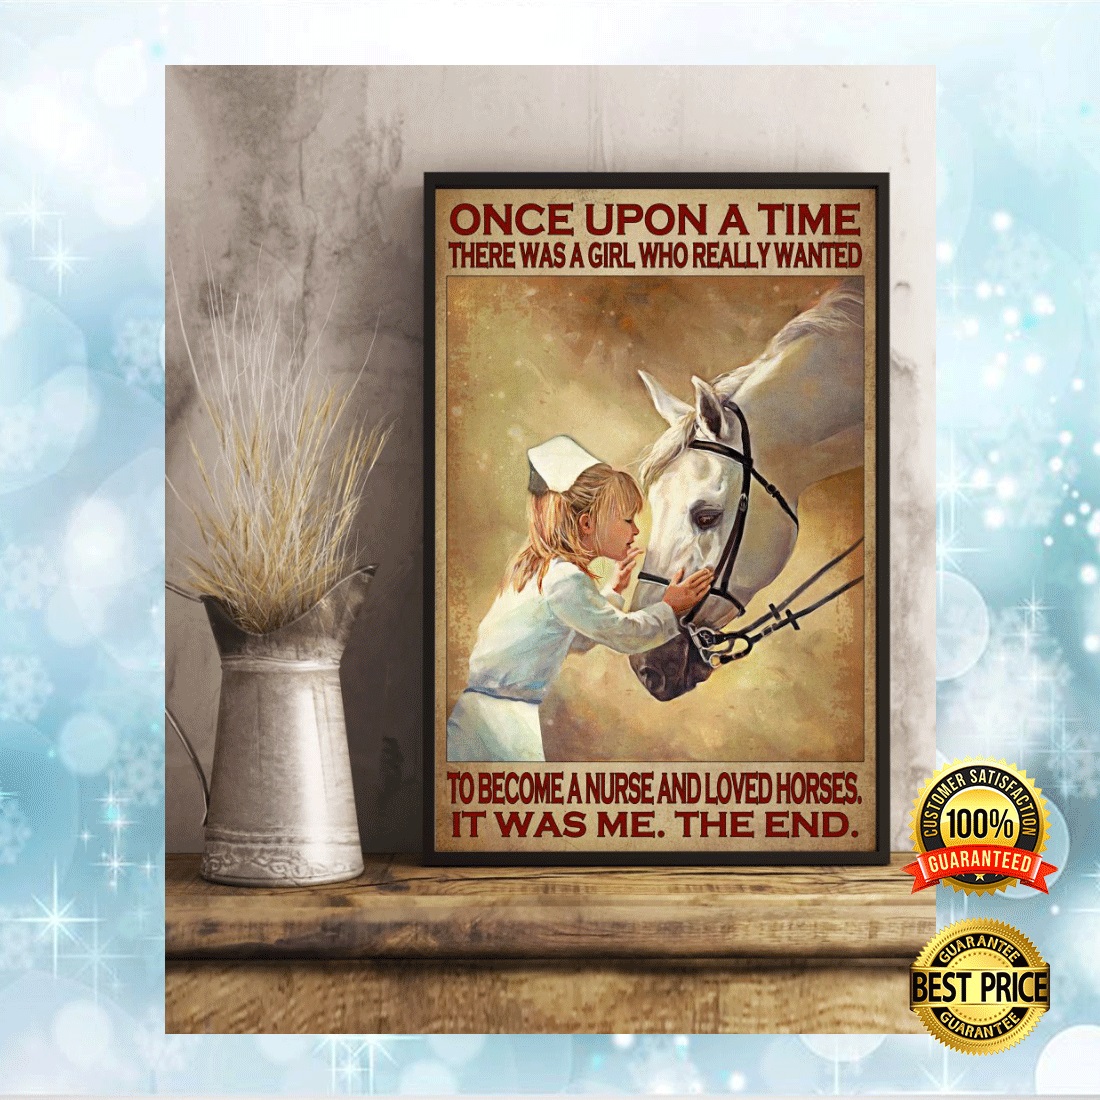 Once upon a time there was a girl who really wanted to become a nurse and loved horses poster 2